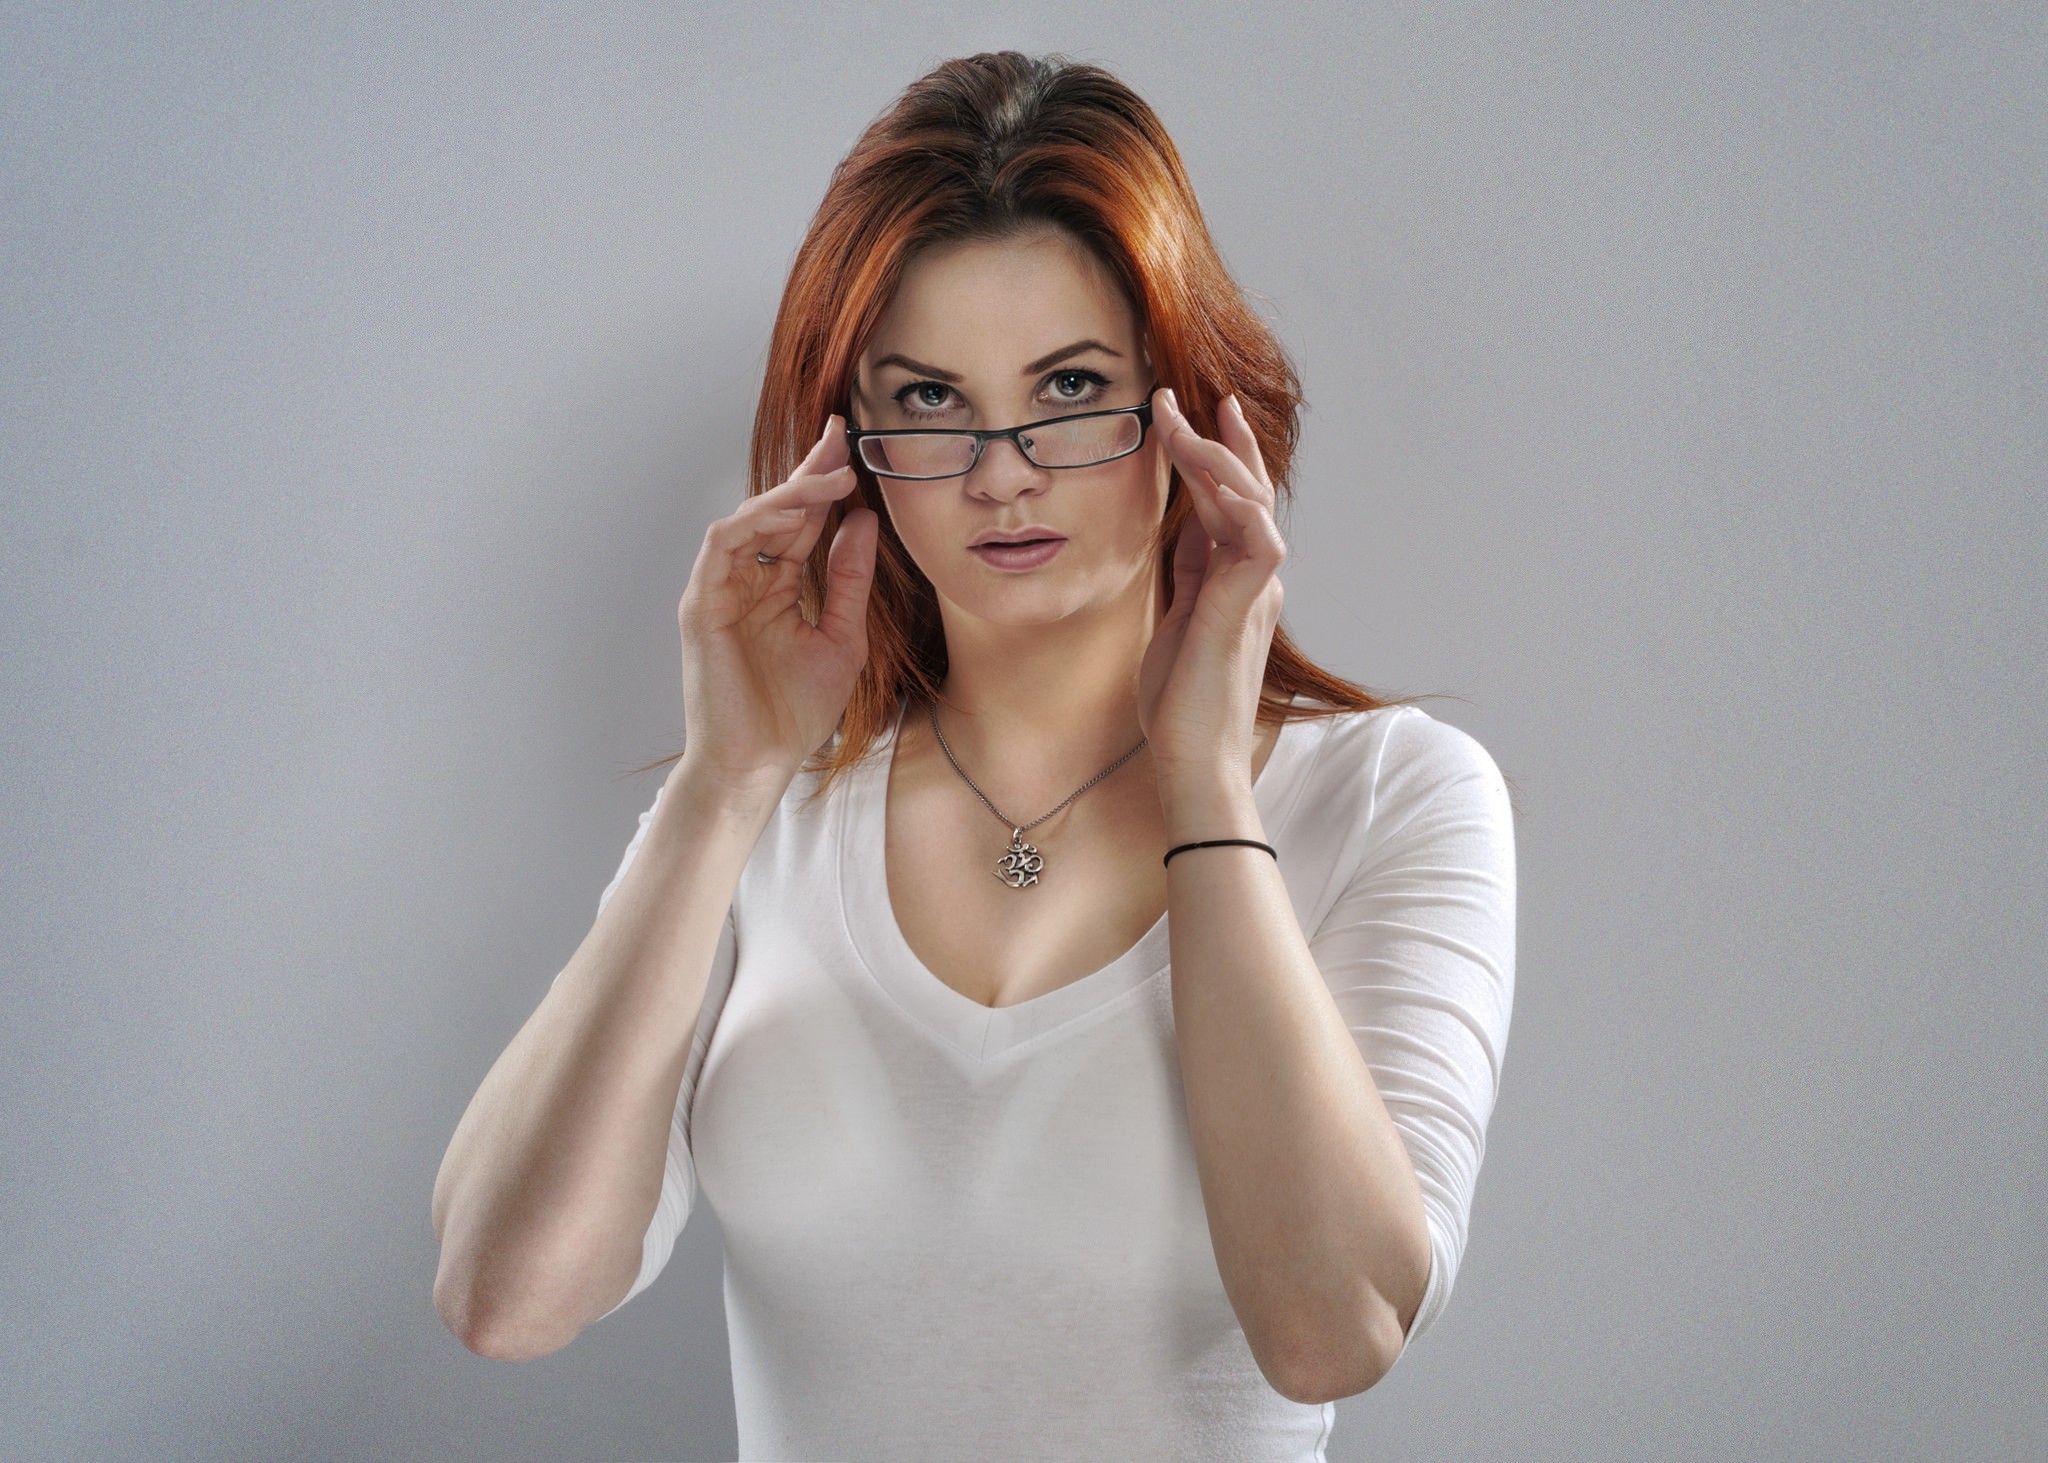 Women Model Redhead Face Portrait Women With Glasses Touching Glasses 2048x1463